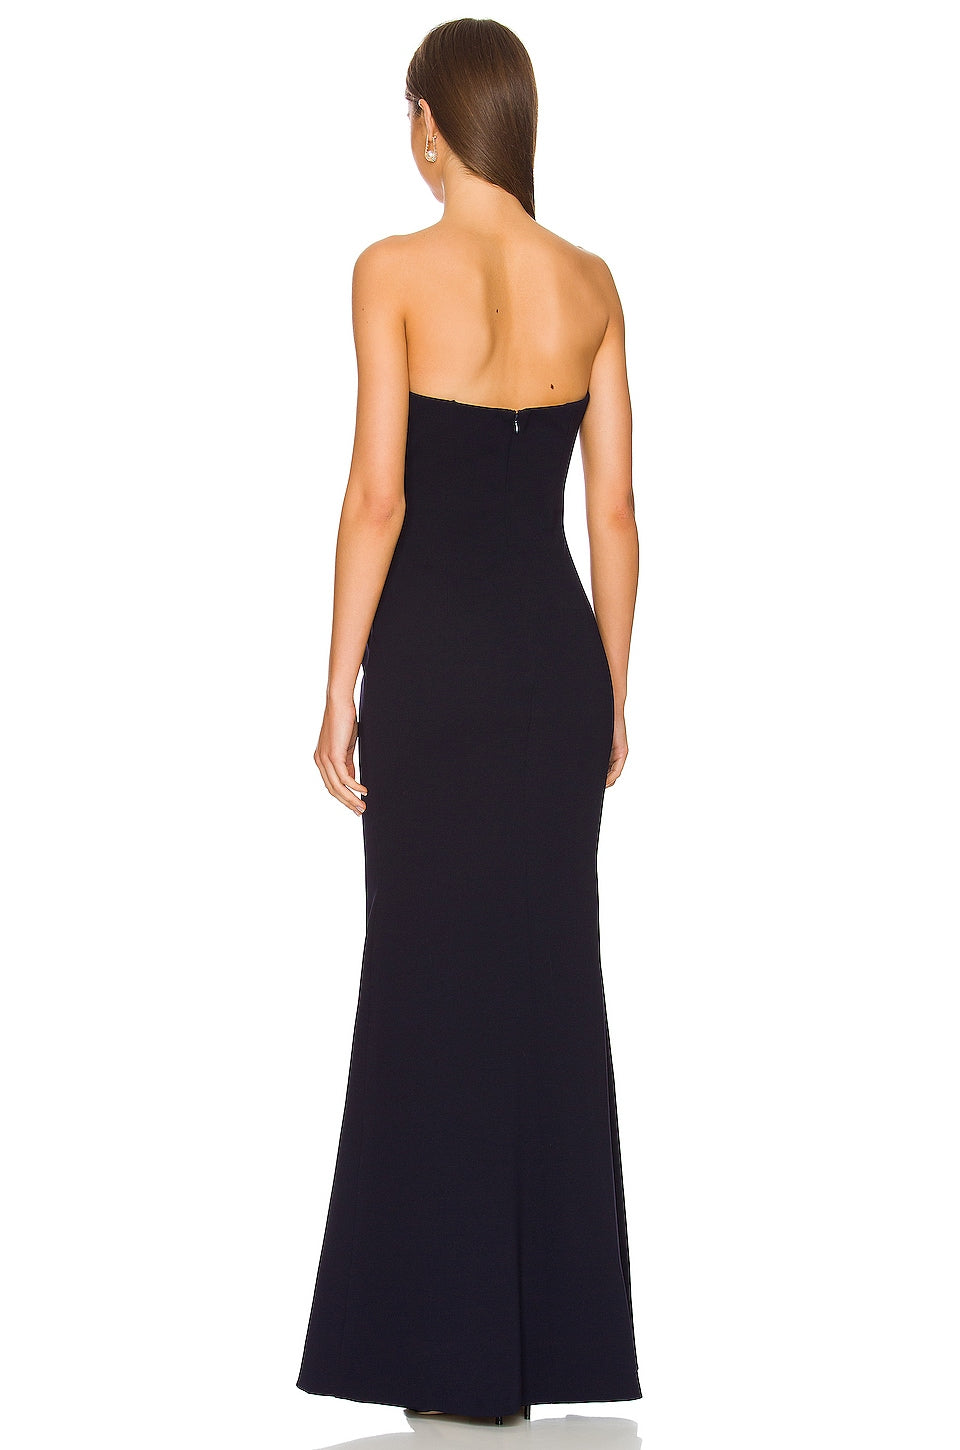 Katie May x REVOLVE Crush Gown in Navy SIZE SMALL